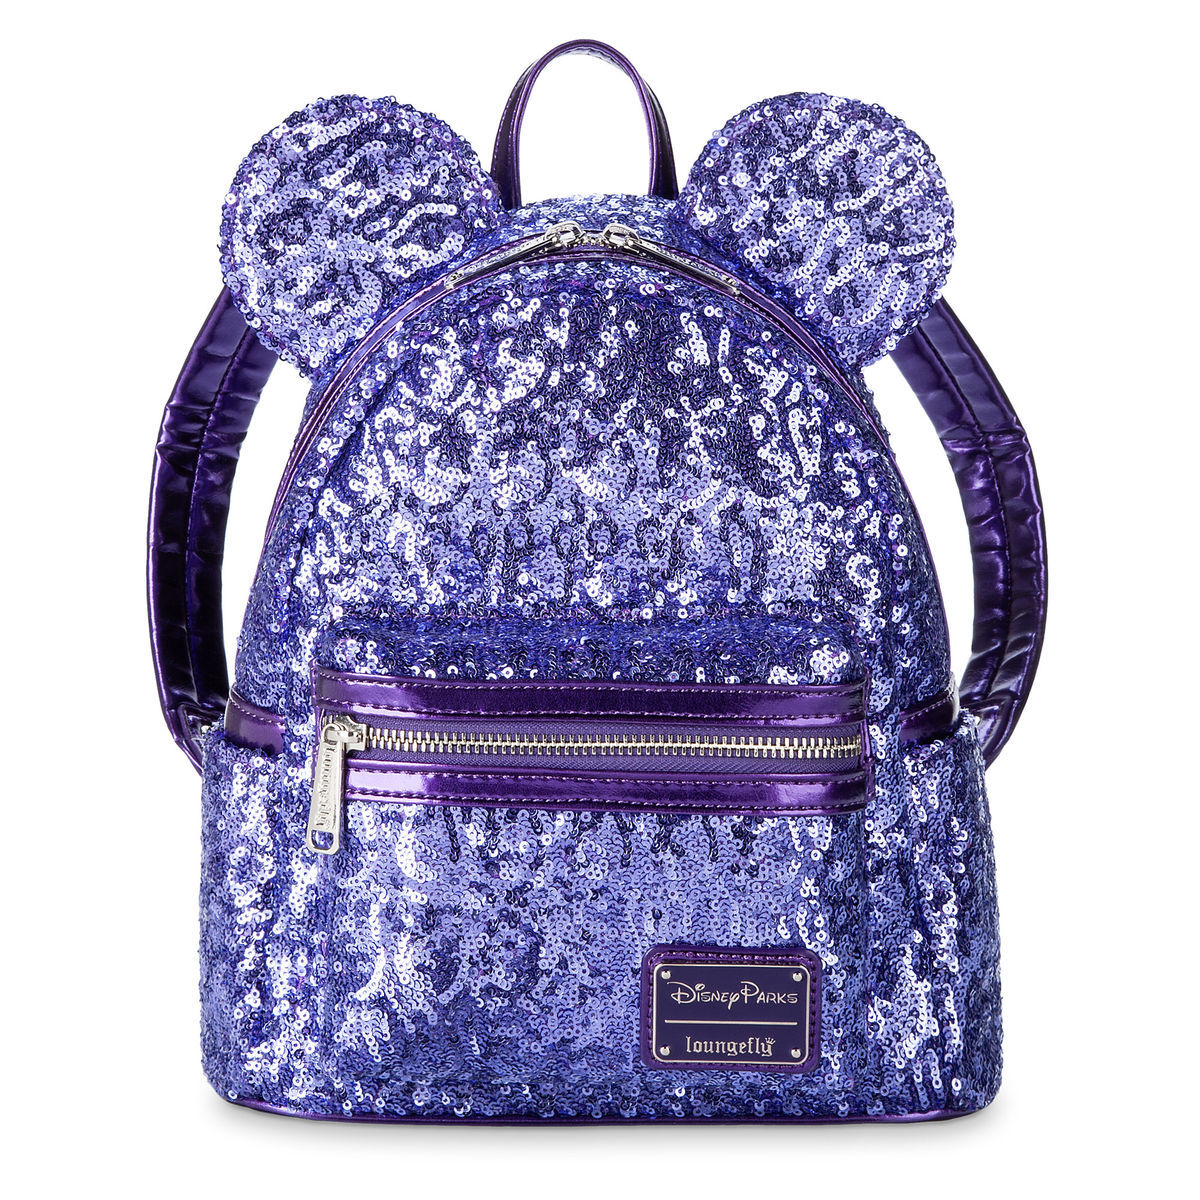 Disney Minnie Potion Purple Sequined Backpack by Loungefly New with Tags